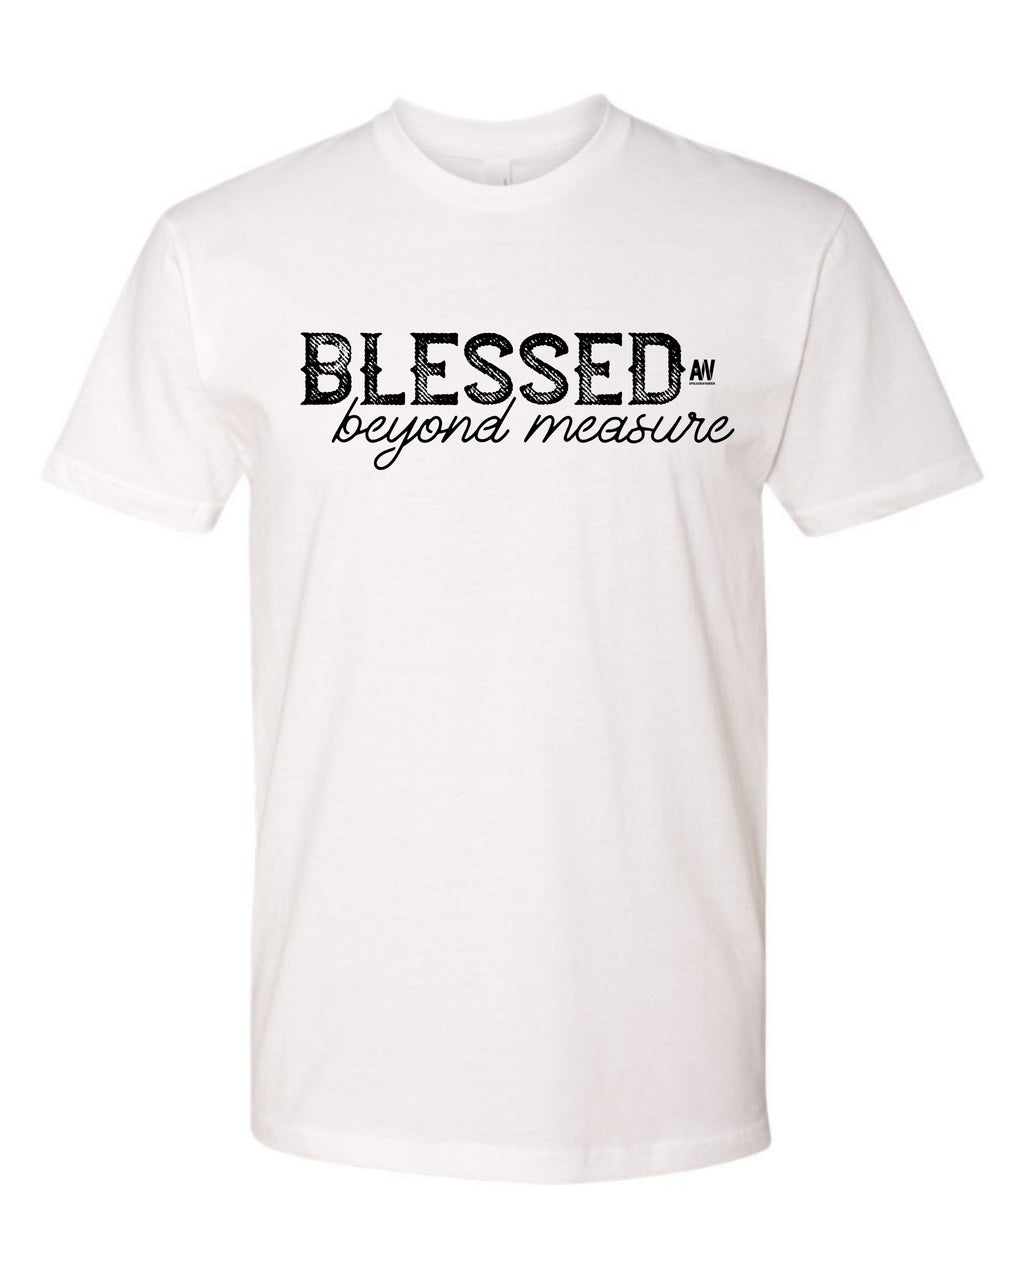 Blessed - Shirts for Men